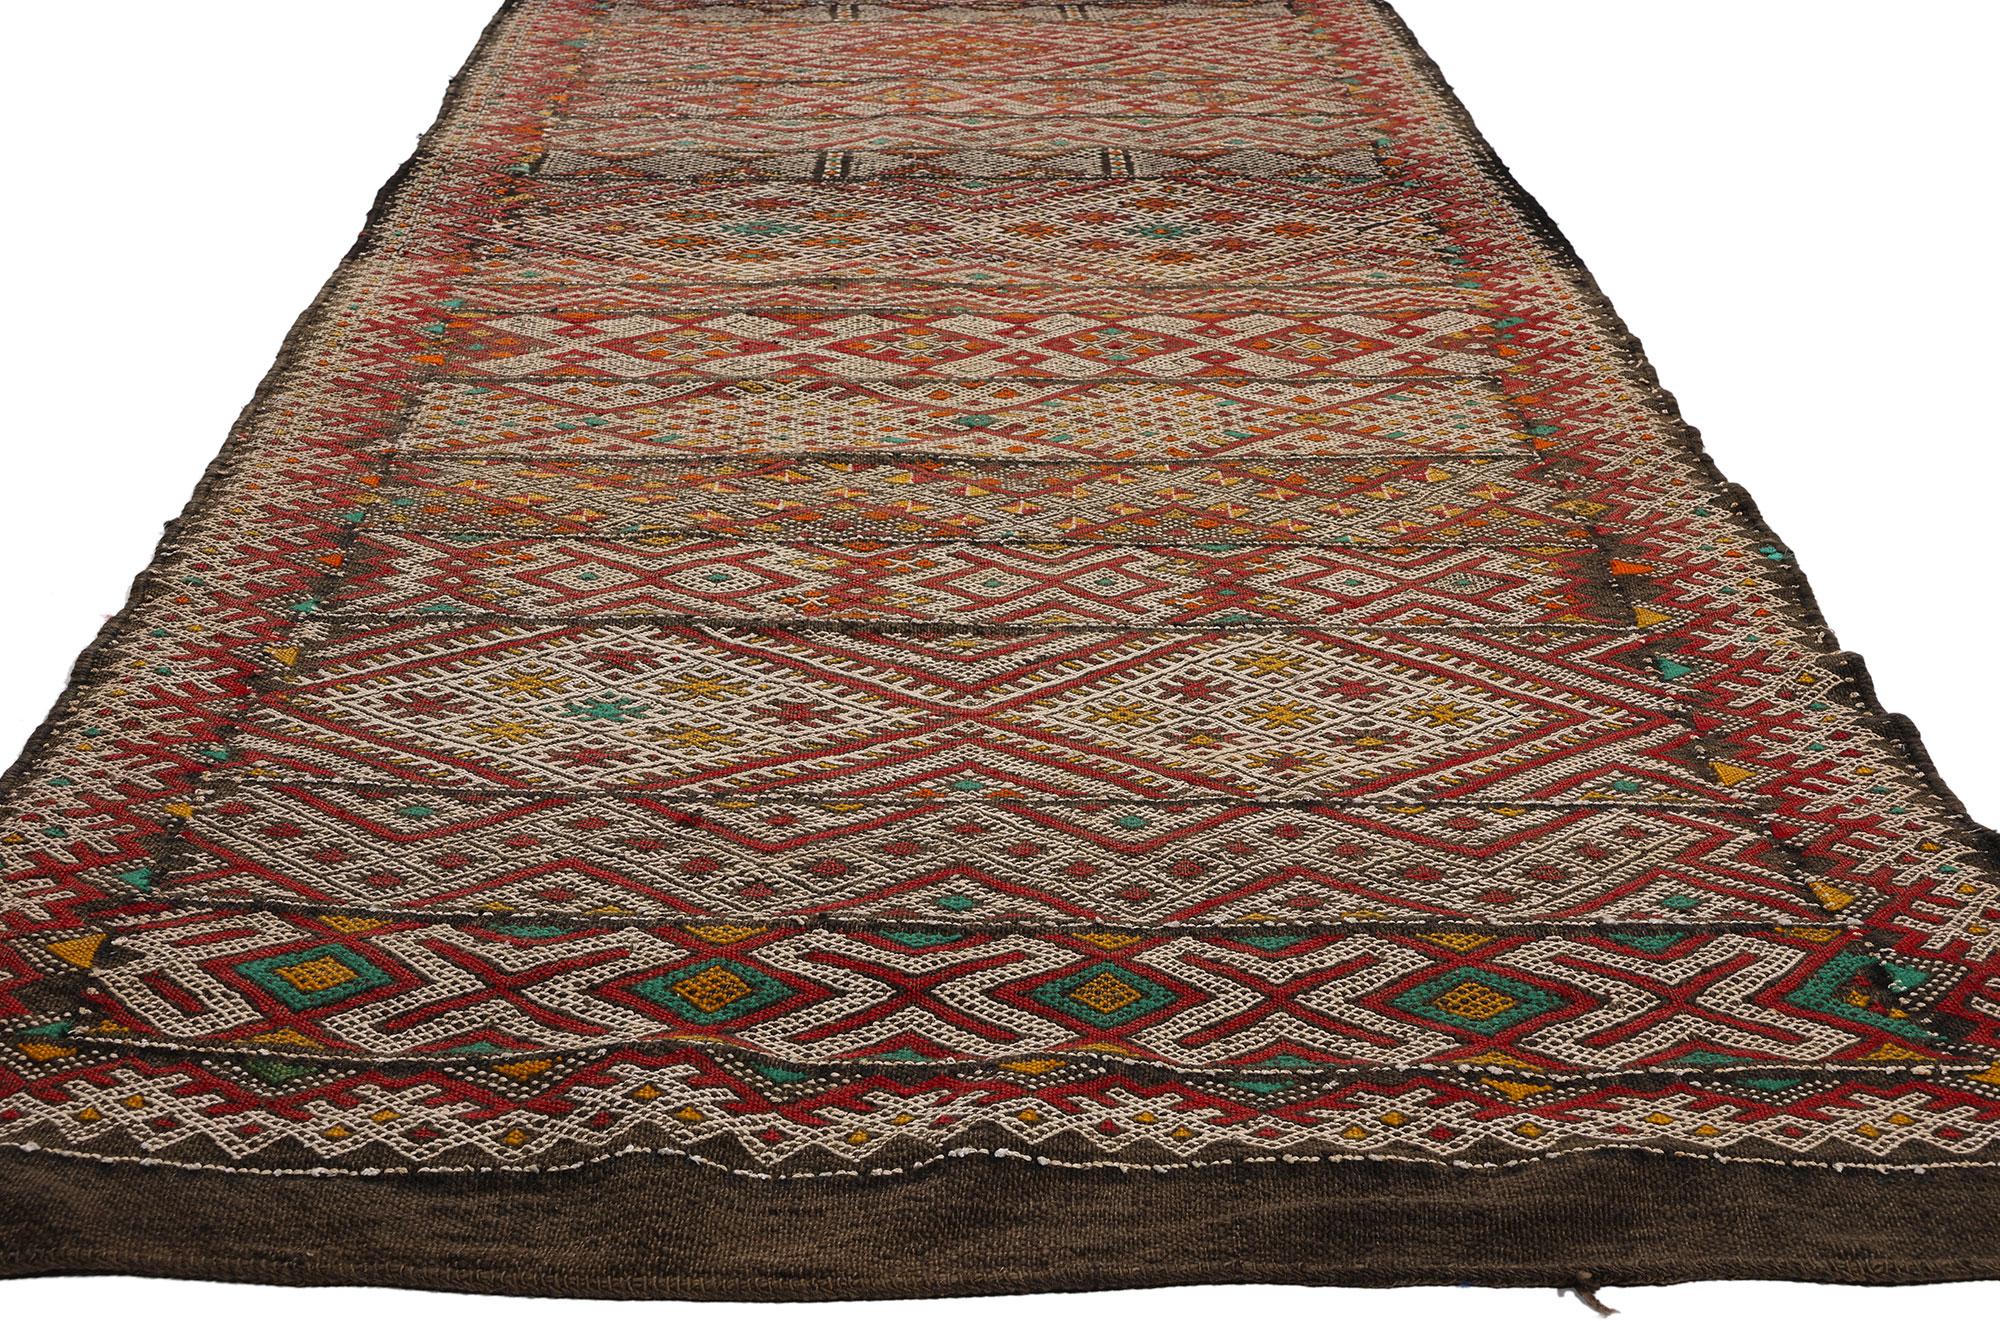 Hand-Woven Vintage Zemmour Moroccan Flatweave Carpet, 03'10 x 21'06 For Sale